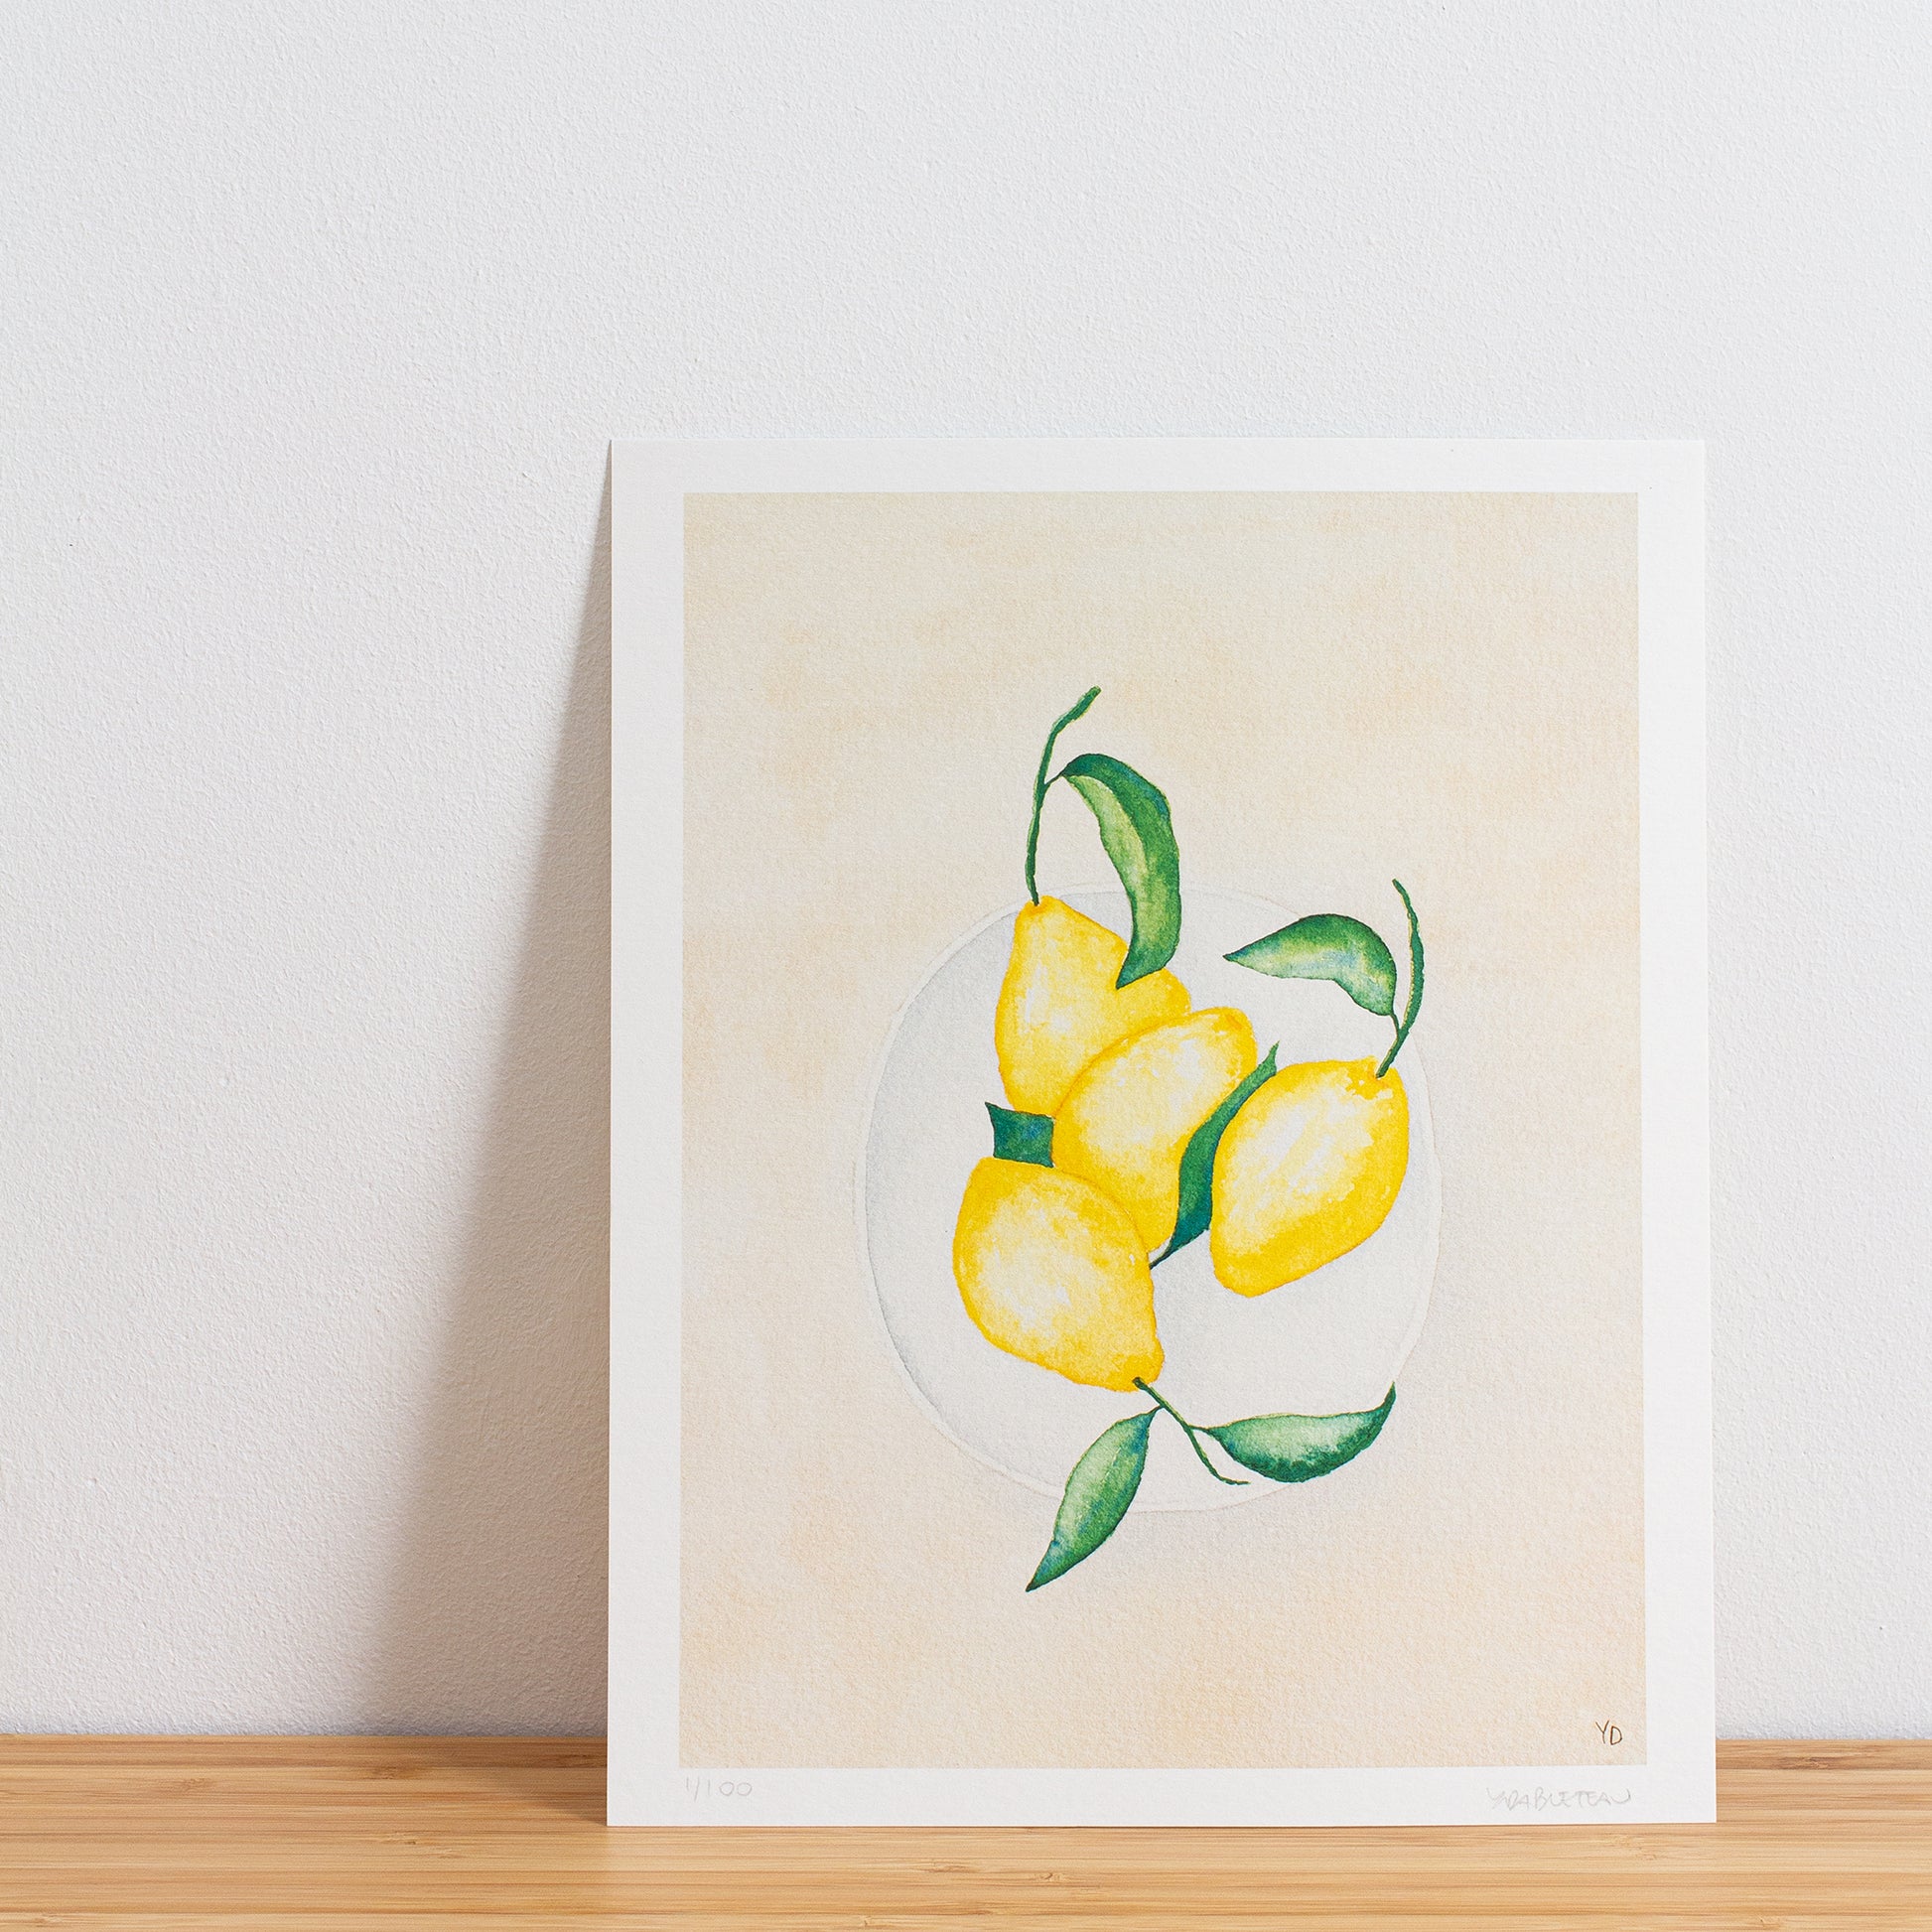 Image is a photo of a Limited edition art print sitting on bamboo wood surface with white background. The print is a reproduction from a handmade watercolour painting representing lemons with leaves on in a white bowl from above.